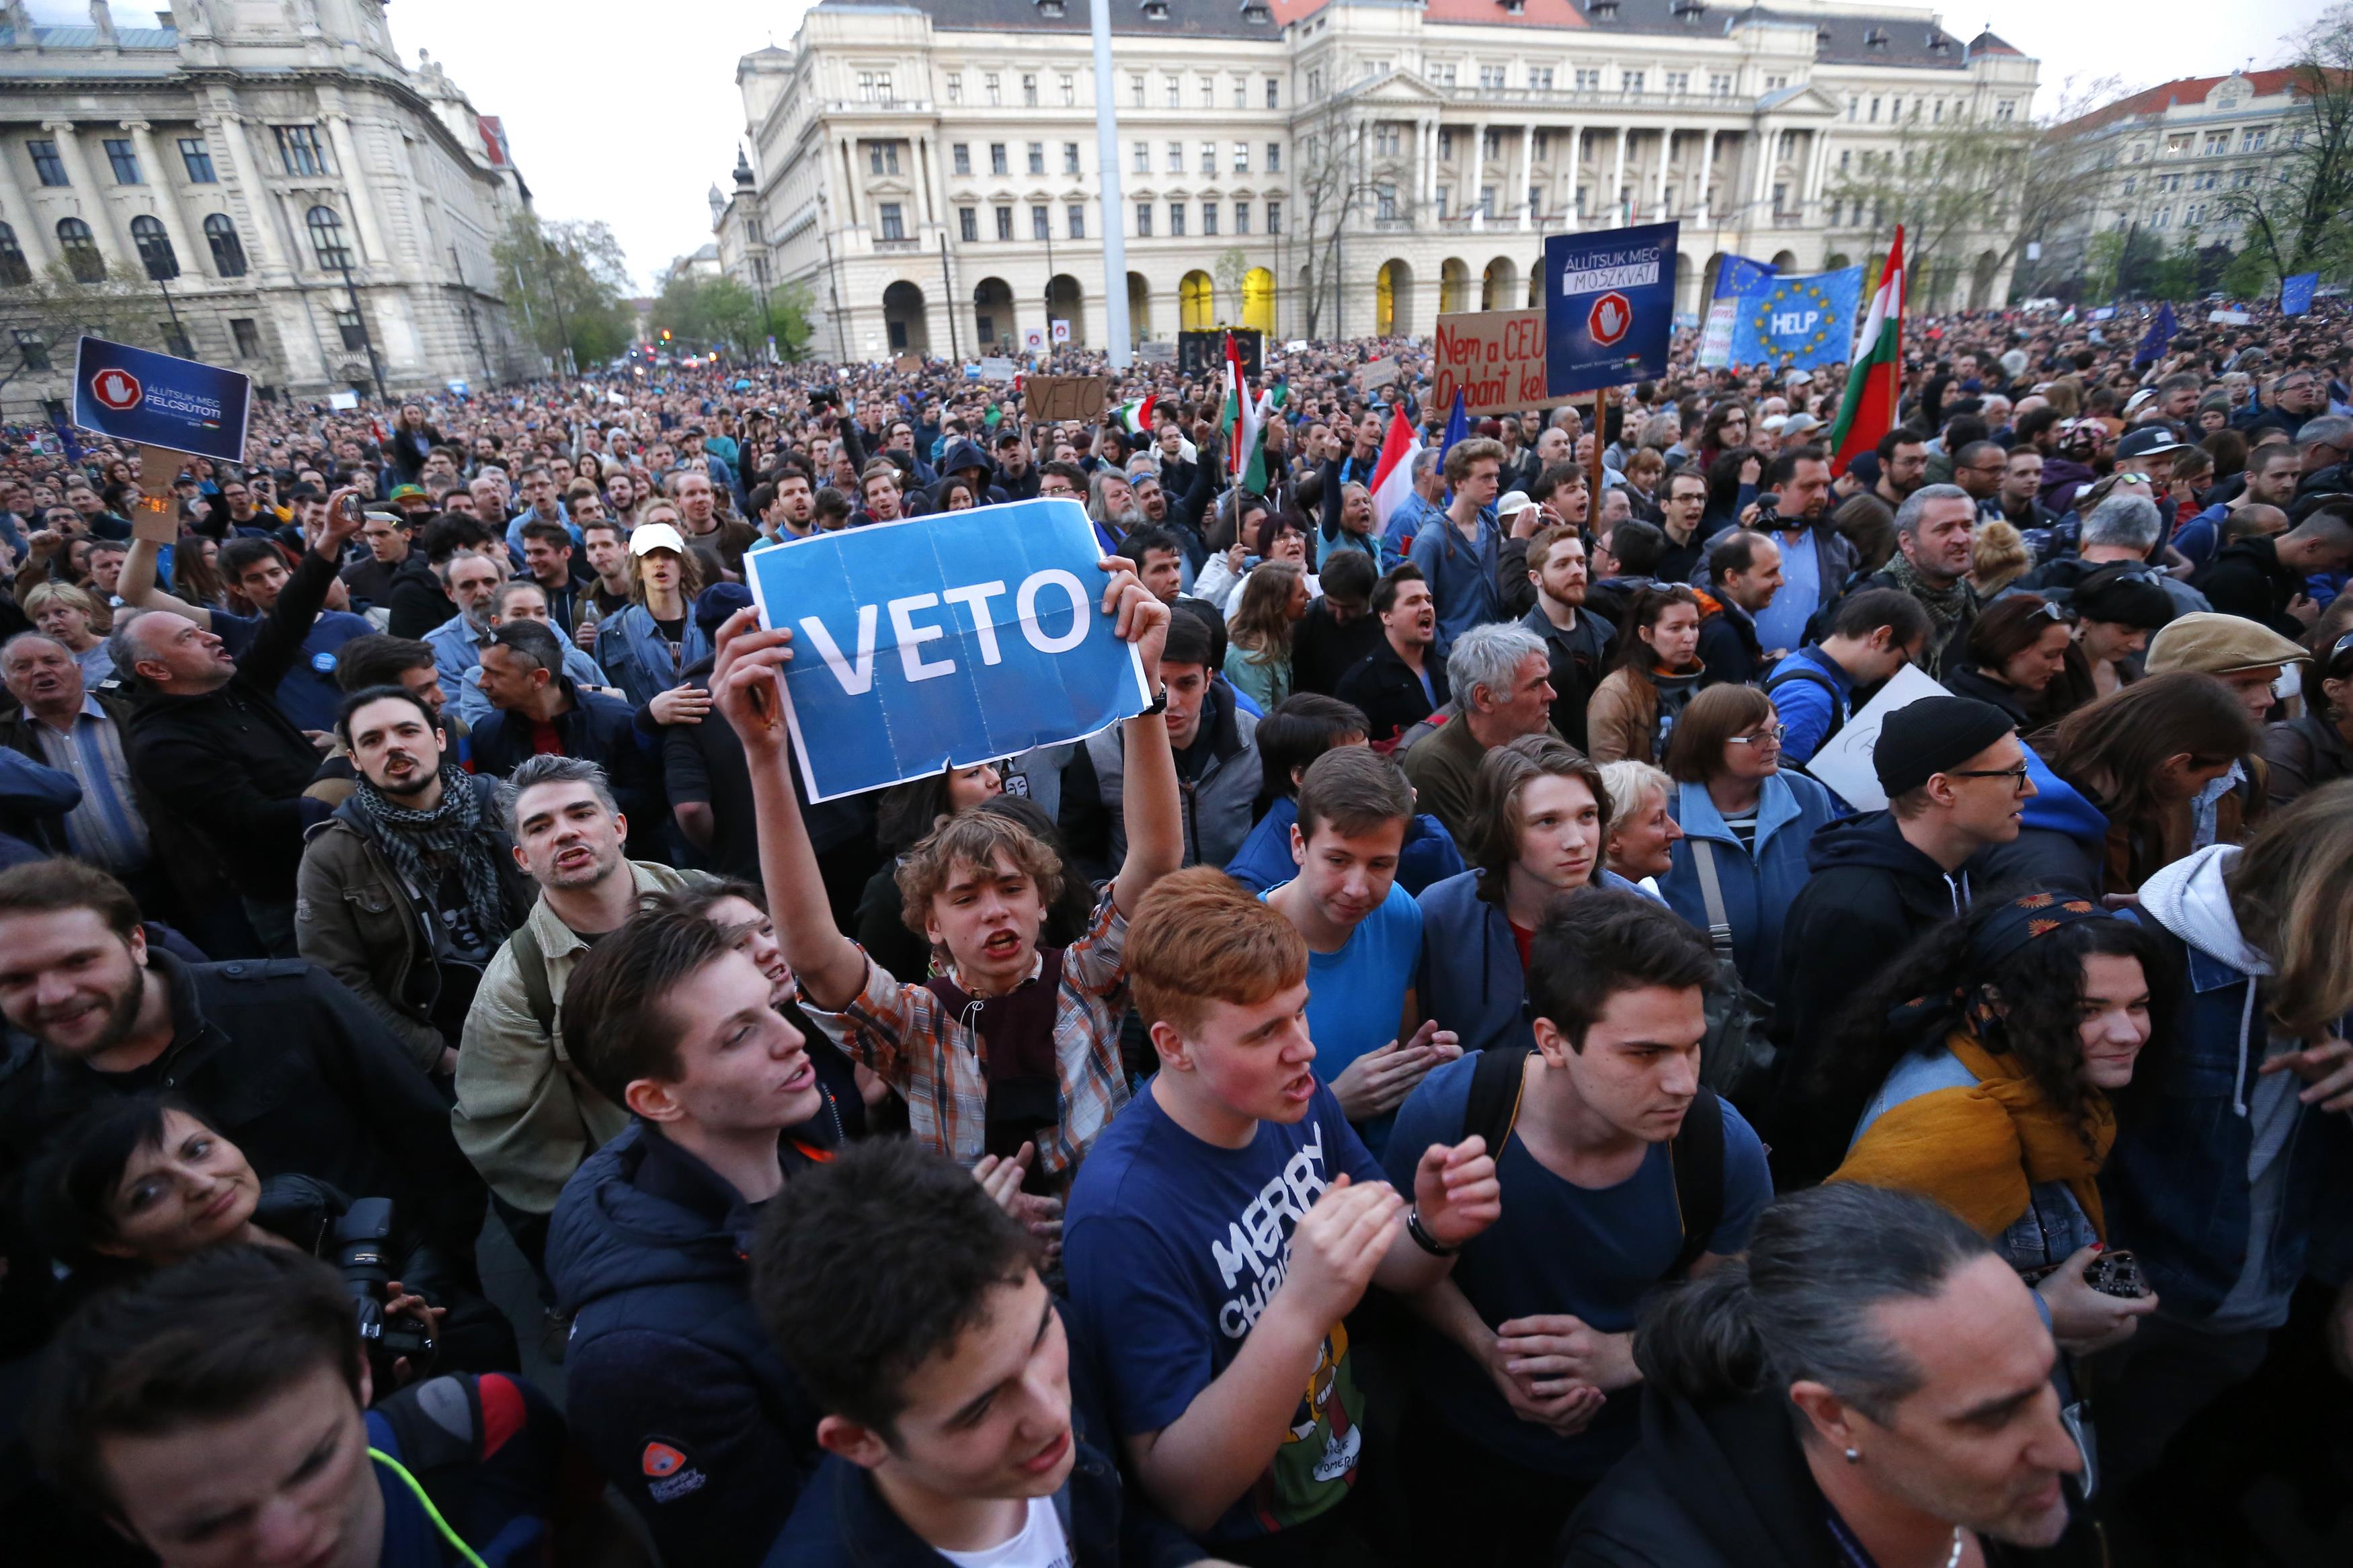 Thousands protest in Hungary against bill that could oust Soros university